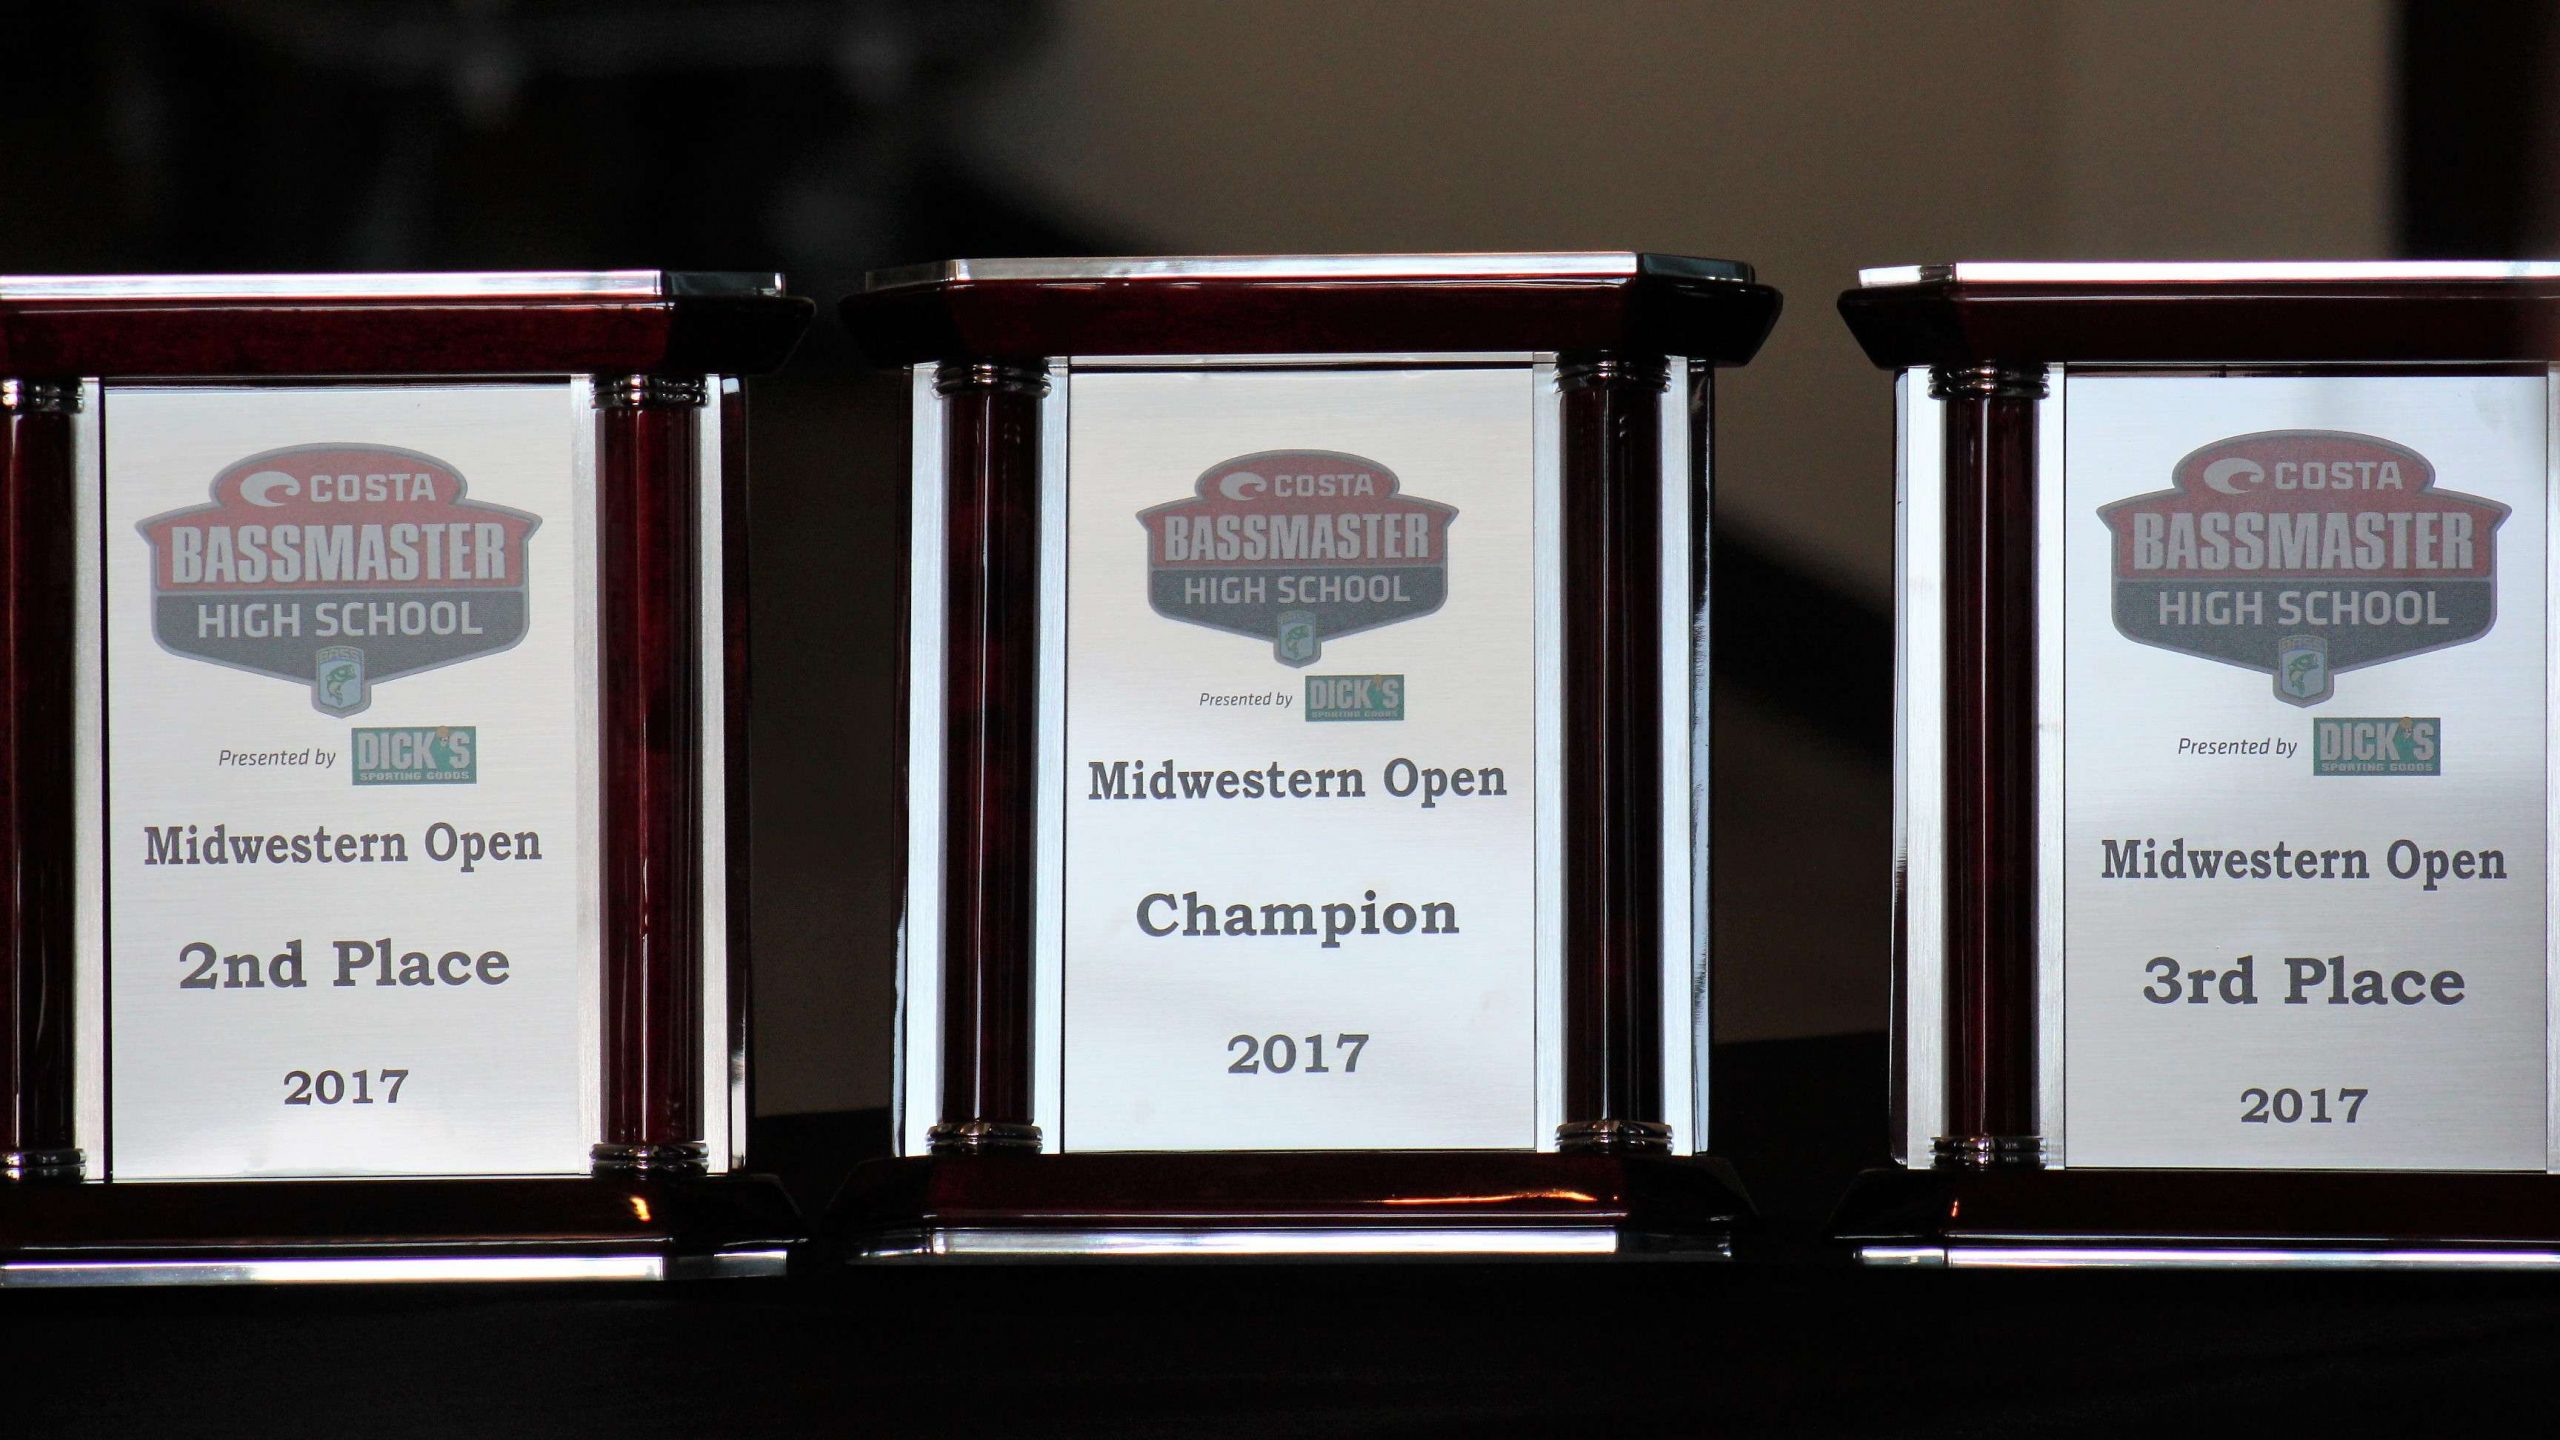 And every team would love to go home with one of these â a first, second, or third place trophy in the Costa Bassmaster High School Midwest Open presented by DICKâs Sporting Goods. Sundayâs take-off is at Lake of the Ozarks State Park at 7:30 a.m. Weigh-in will begin at 3:30 p.m. at the same location. Be sure to catch all the action right here on Bassmaster.com.